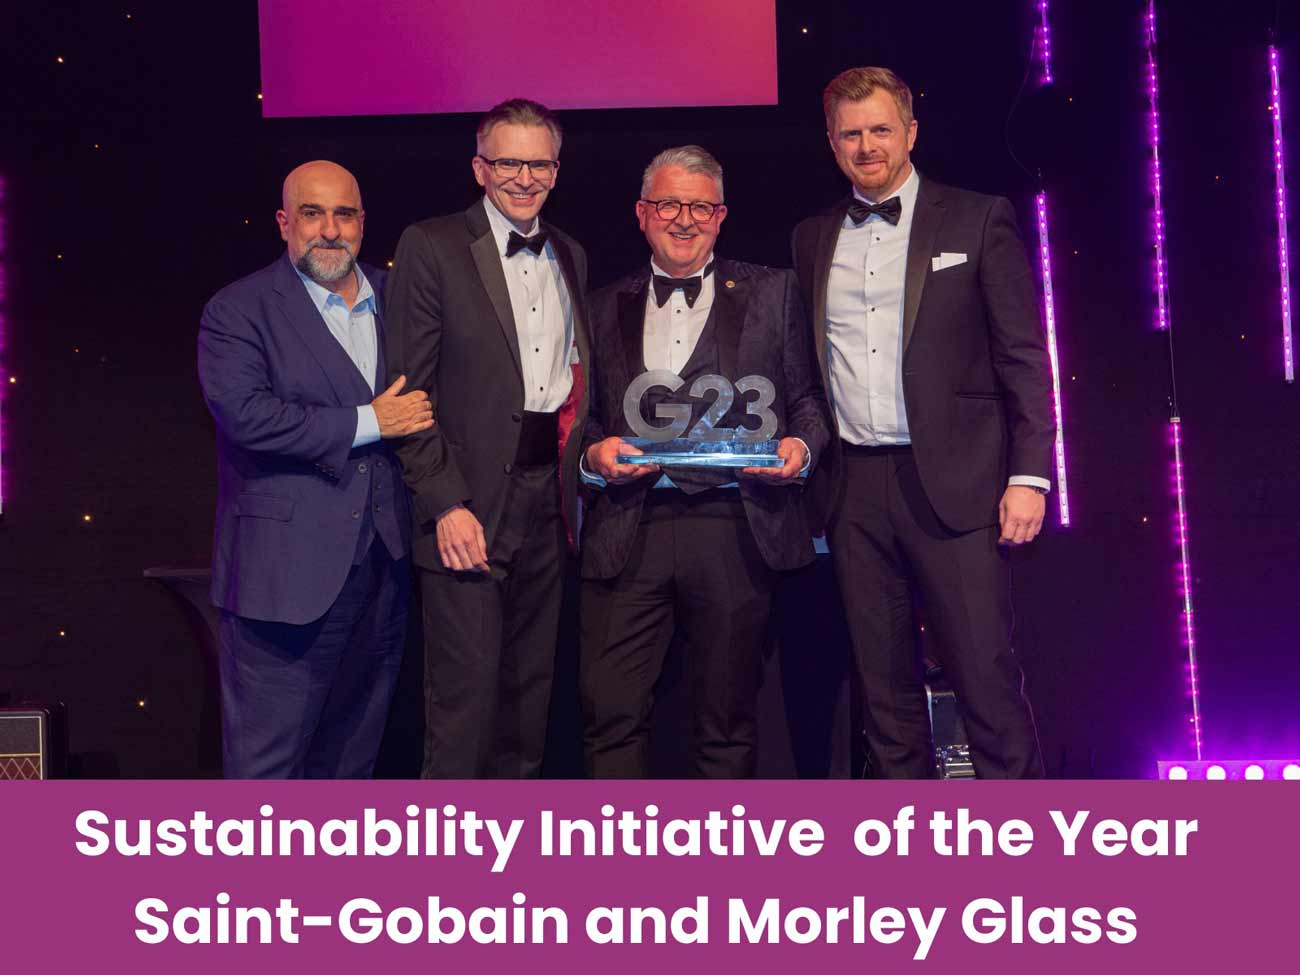 Morley Glass and Saint-Gobain Glass winning their G23 Award for sustainability initiative of the year.